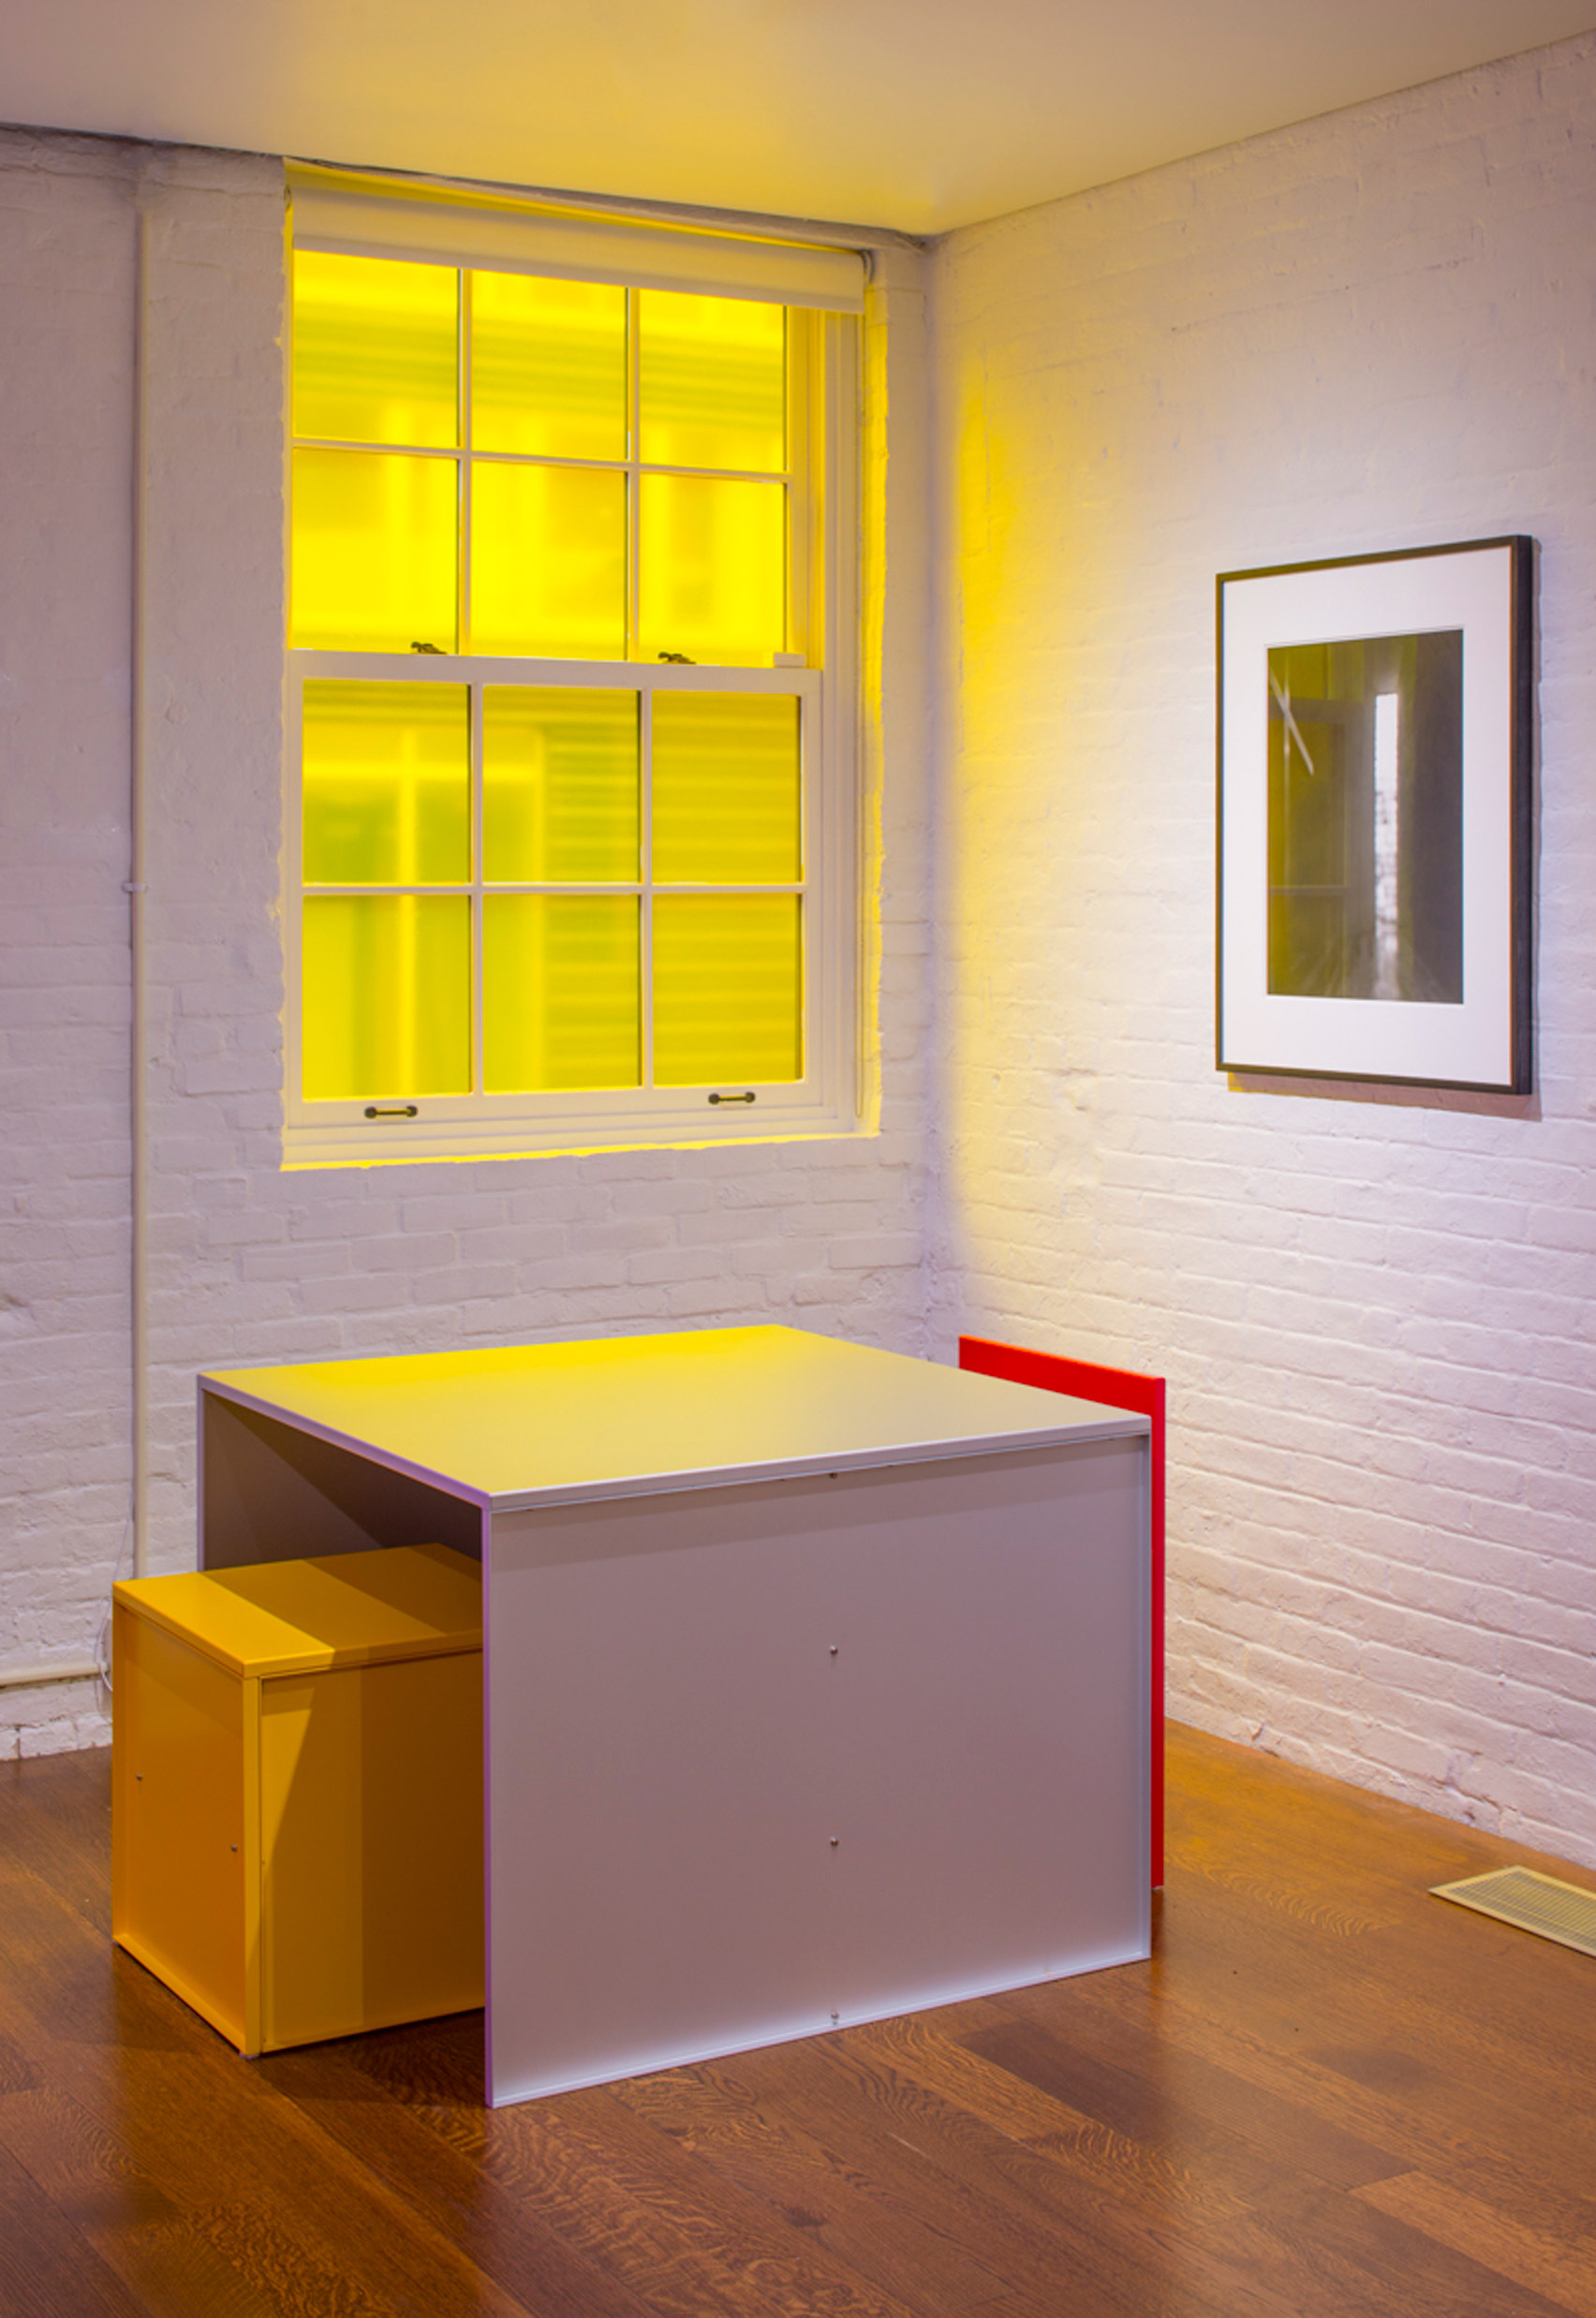 Architecture of Color: The Legacy of Luis Barragán exhibition at Timothy Taylor, New York